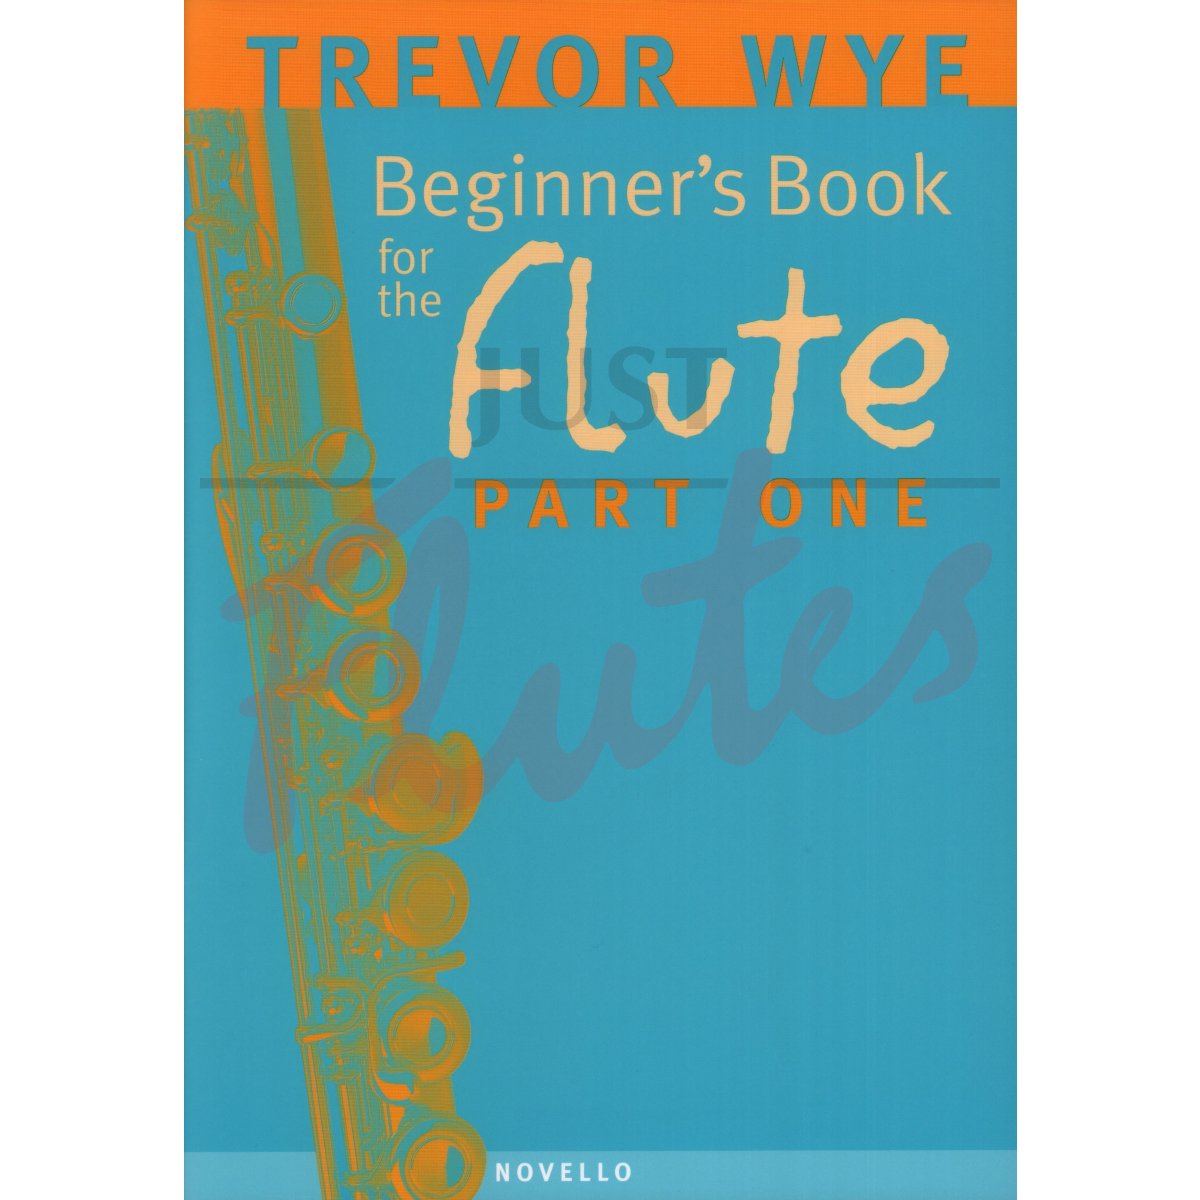 Beginner&#039;s Book for the Flute, Part One